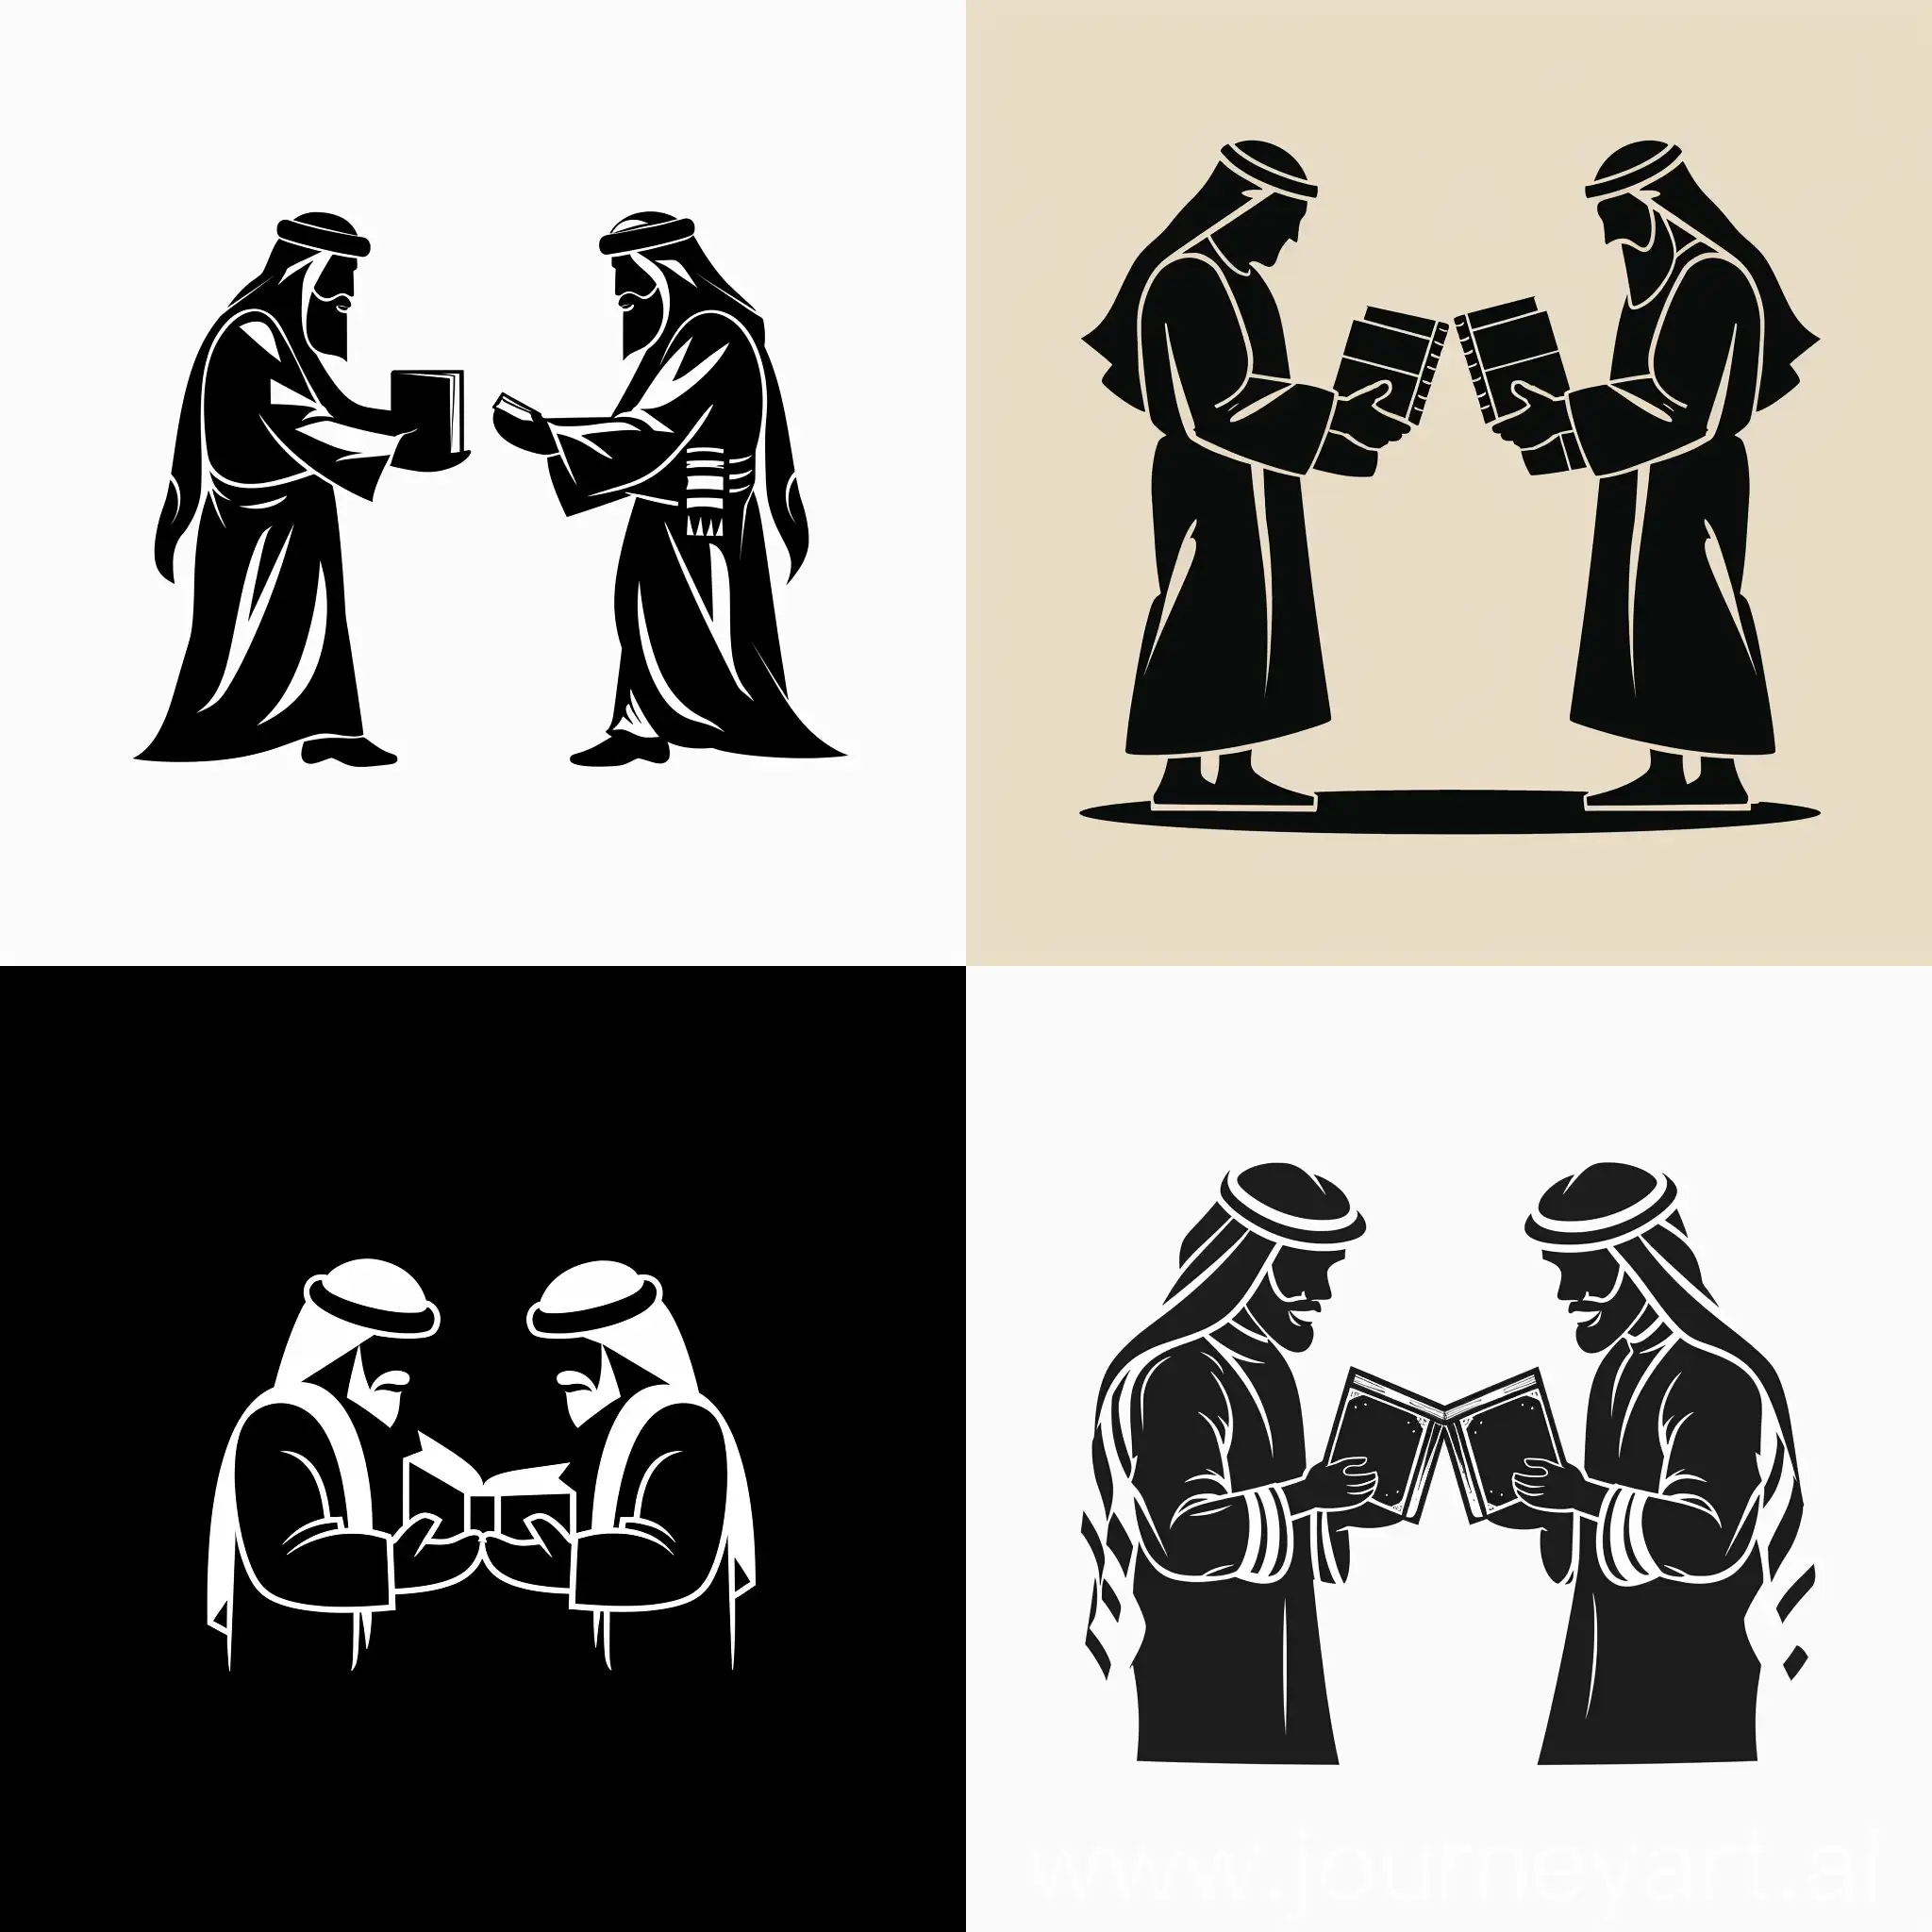 a logo of 2 bedouins men exchanging books, make them full black and no background